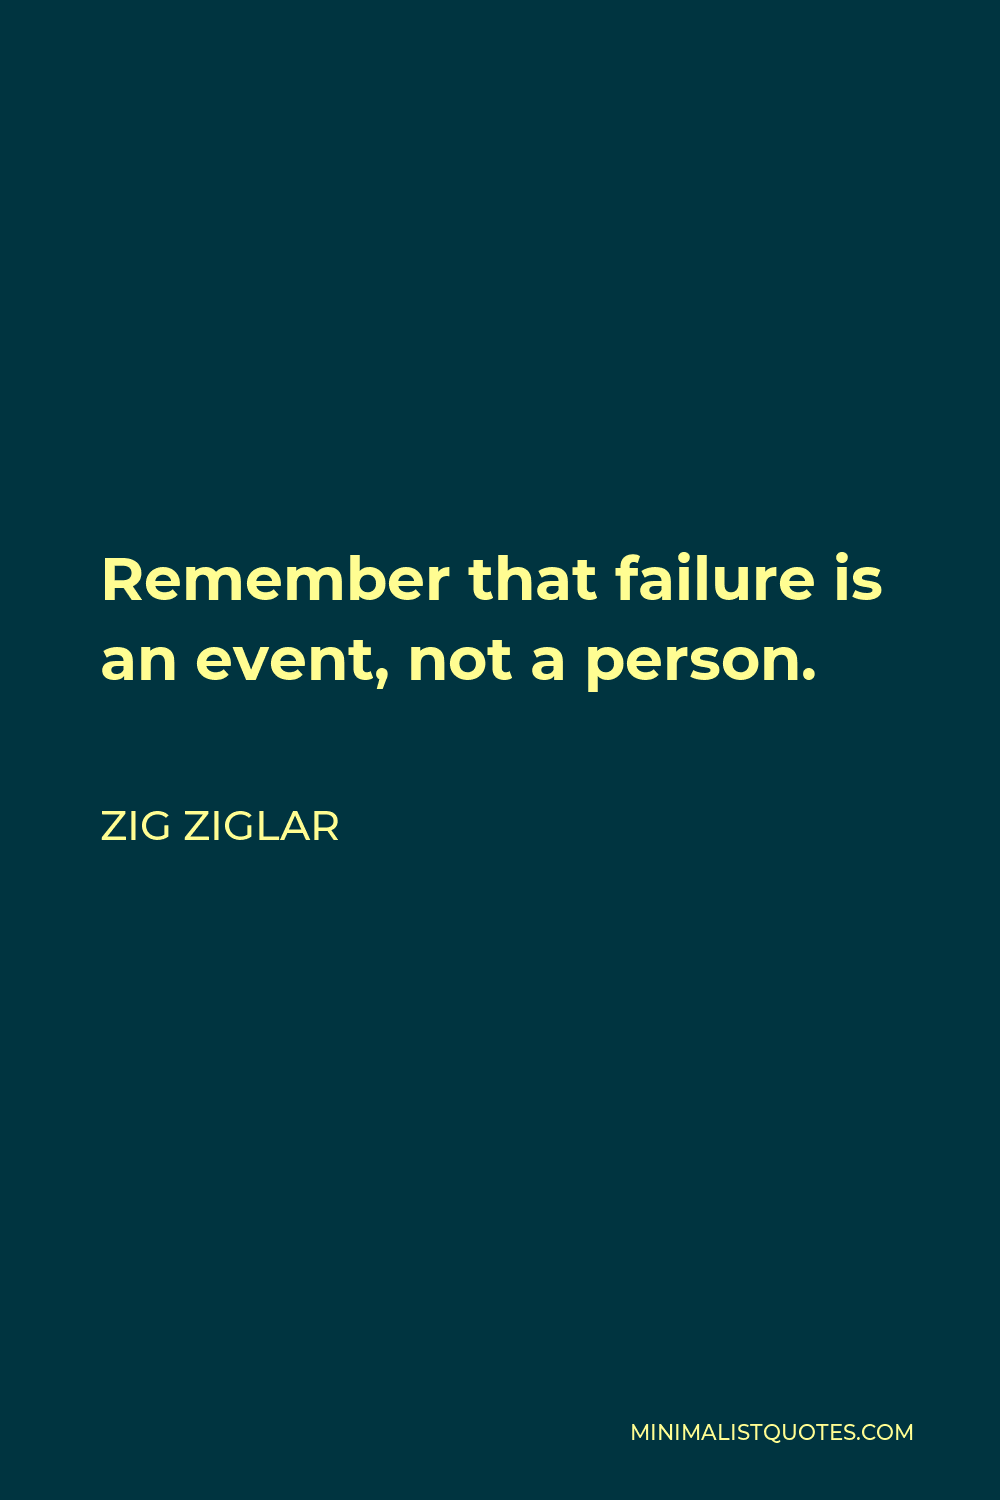 Zig Ziglar Quote - Remember that failure is an event, not a person.